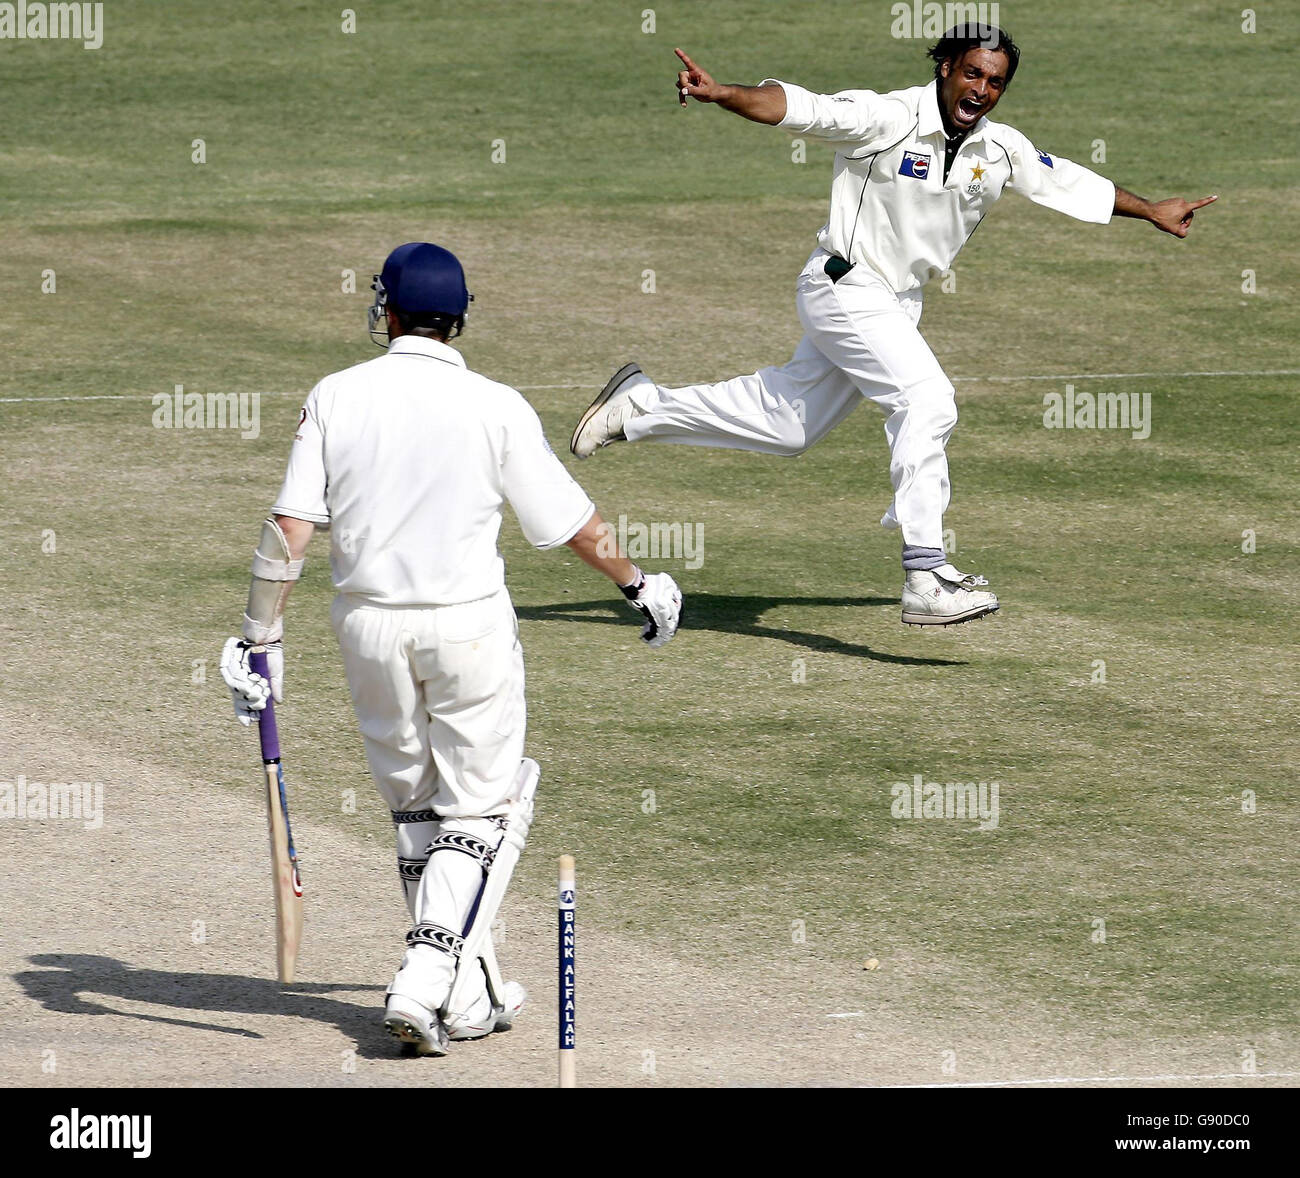 Pakistan's Shoaib Akhtar (R) celebrates clean bowling England's Ashley Giles during the fifth day of the first Test match at the Multan Cricket Stadium in Multan, Pakistan, Wednesday November 16, 2005. See PA story CRICKET England. PRESS ASSOCIATION Photo. Photo credit should read: Gareth Copley/PA. ***- NO MOBILE PHONE USE*** Stock Photo